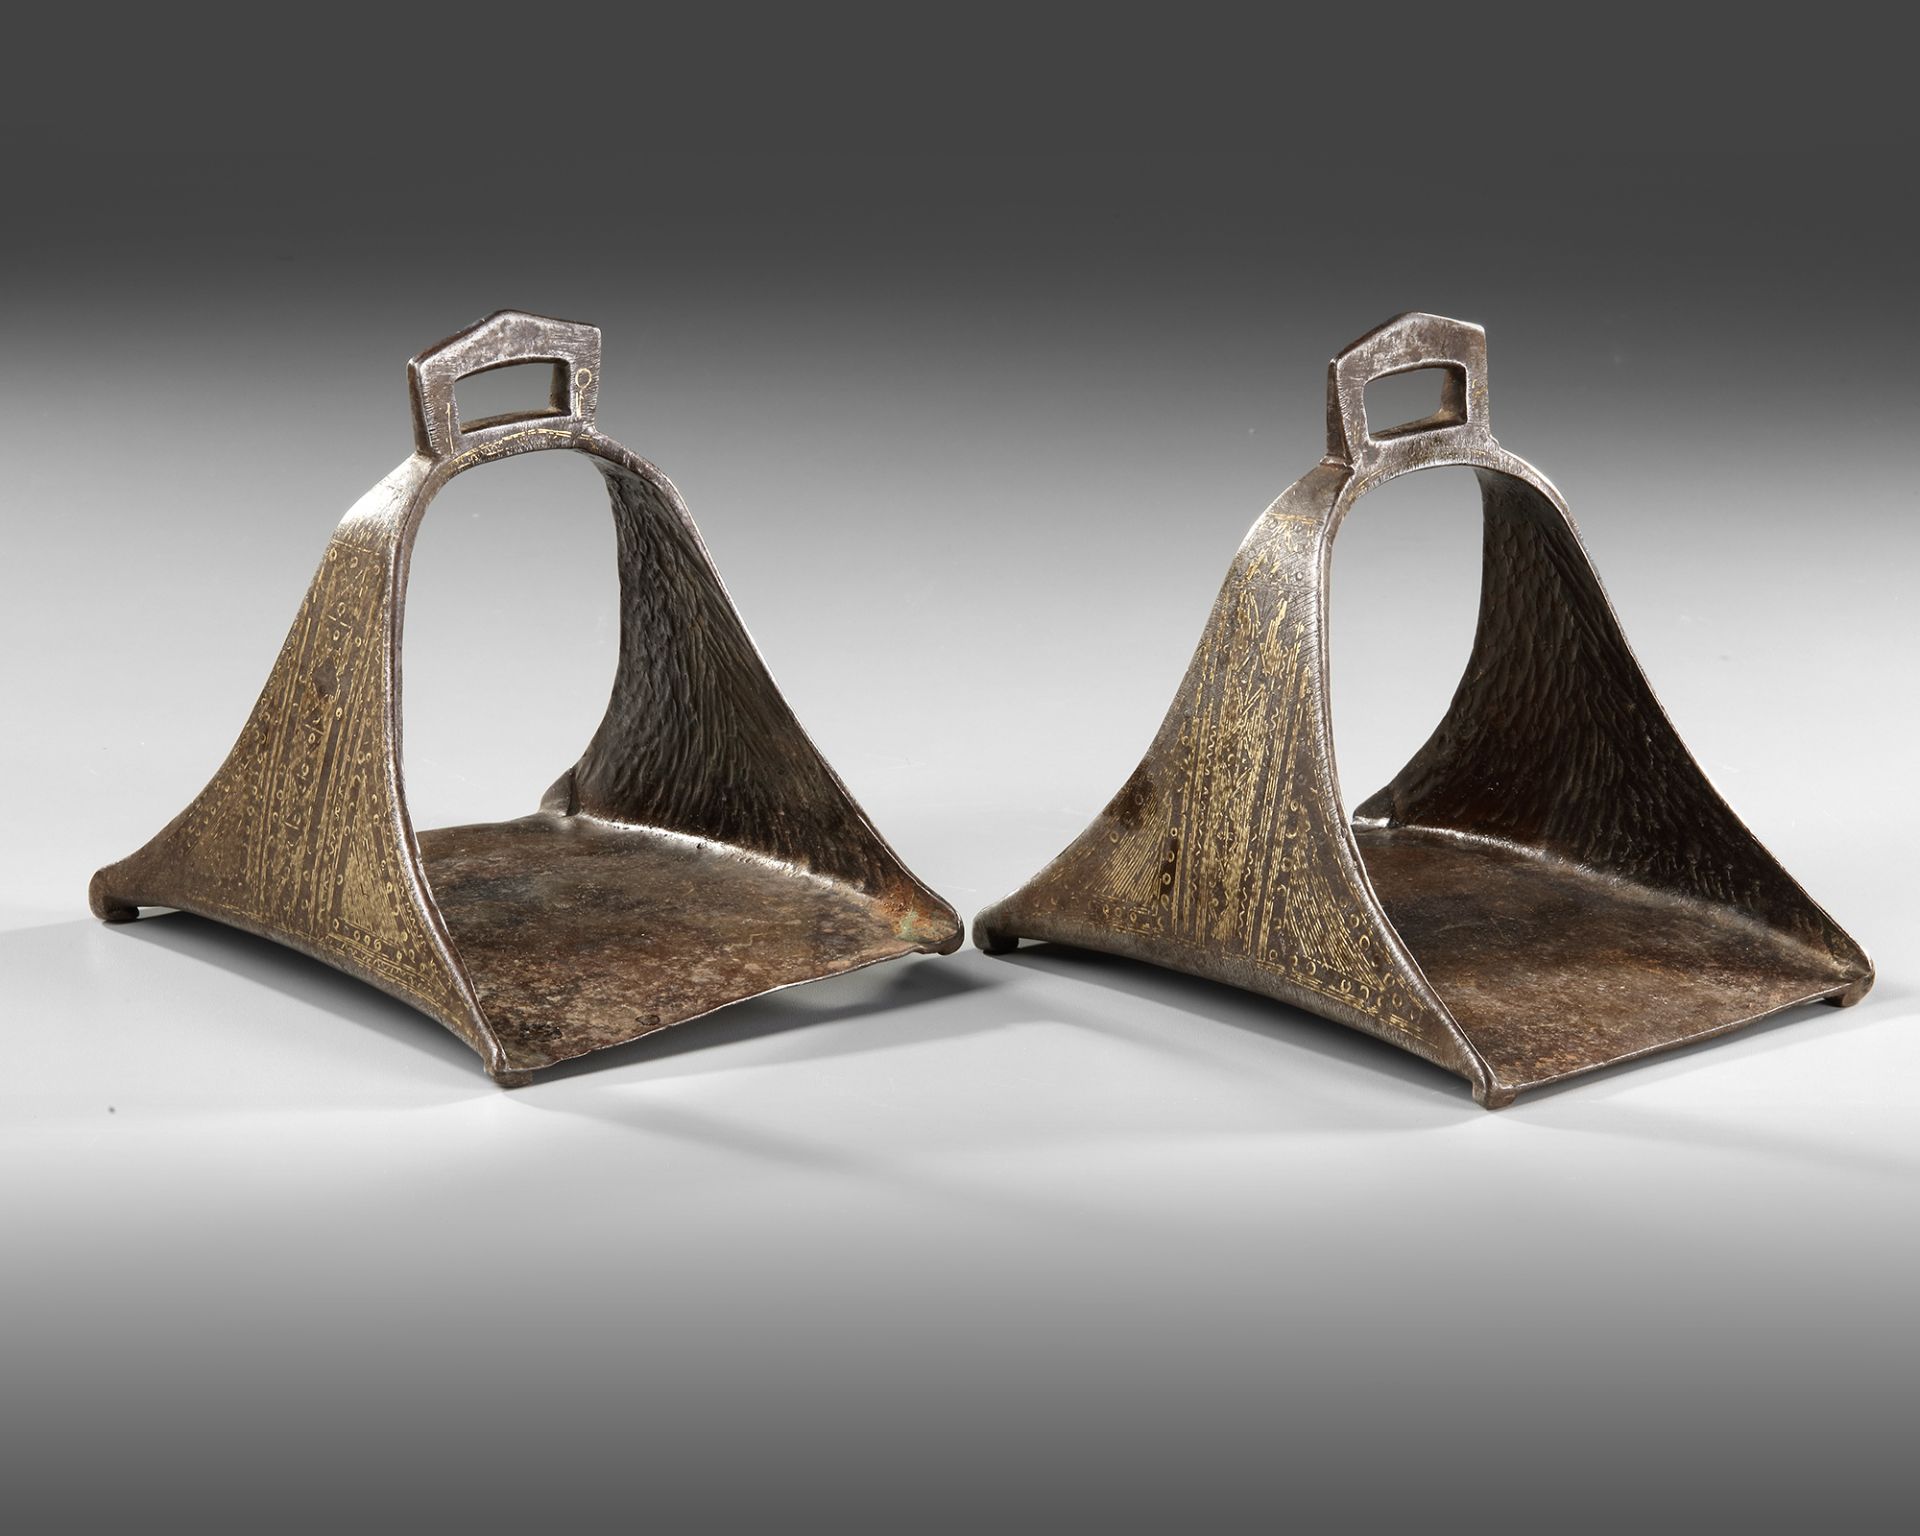 A PAIR OF STEEL STIRRUPS, NORTH AFRICA, 19TH CENTURY - Image 3 of 6